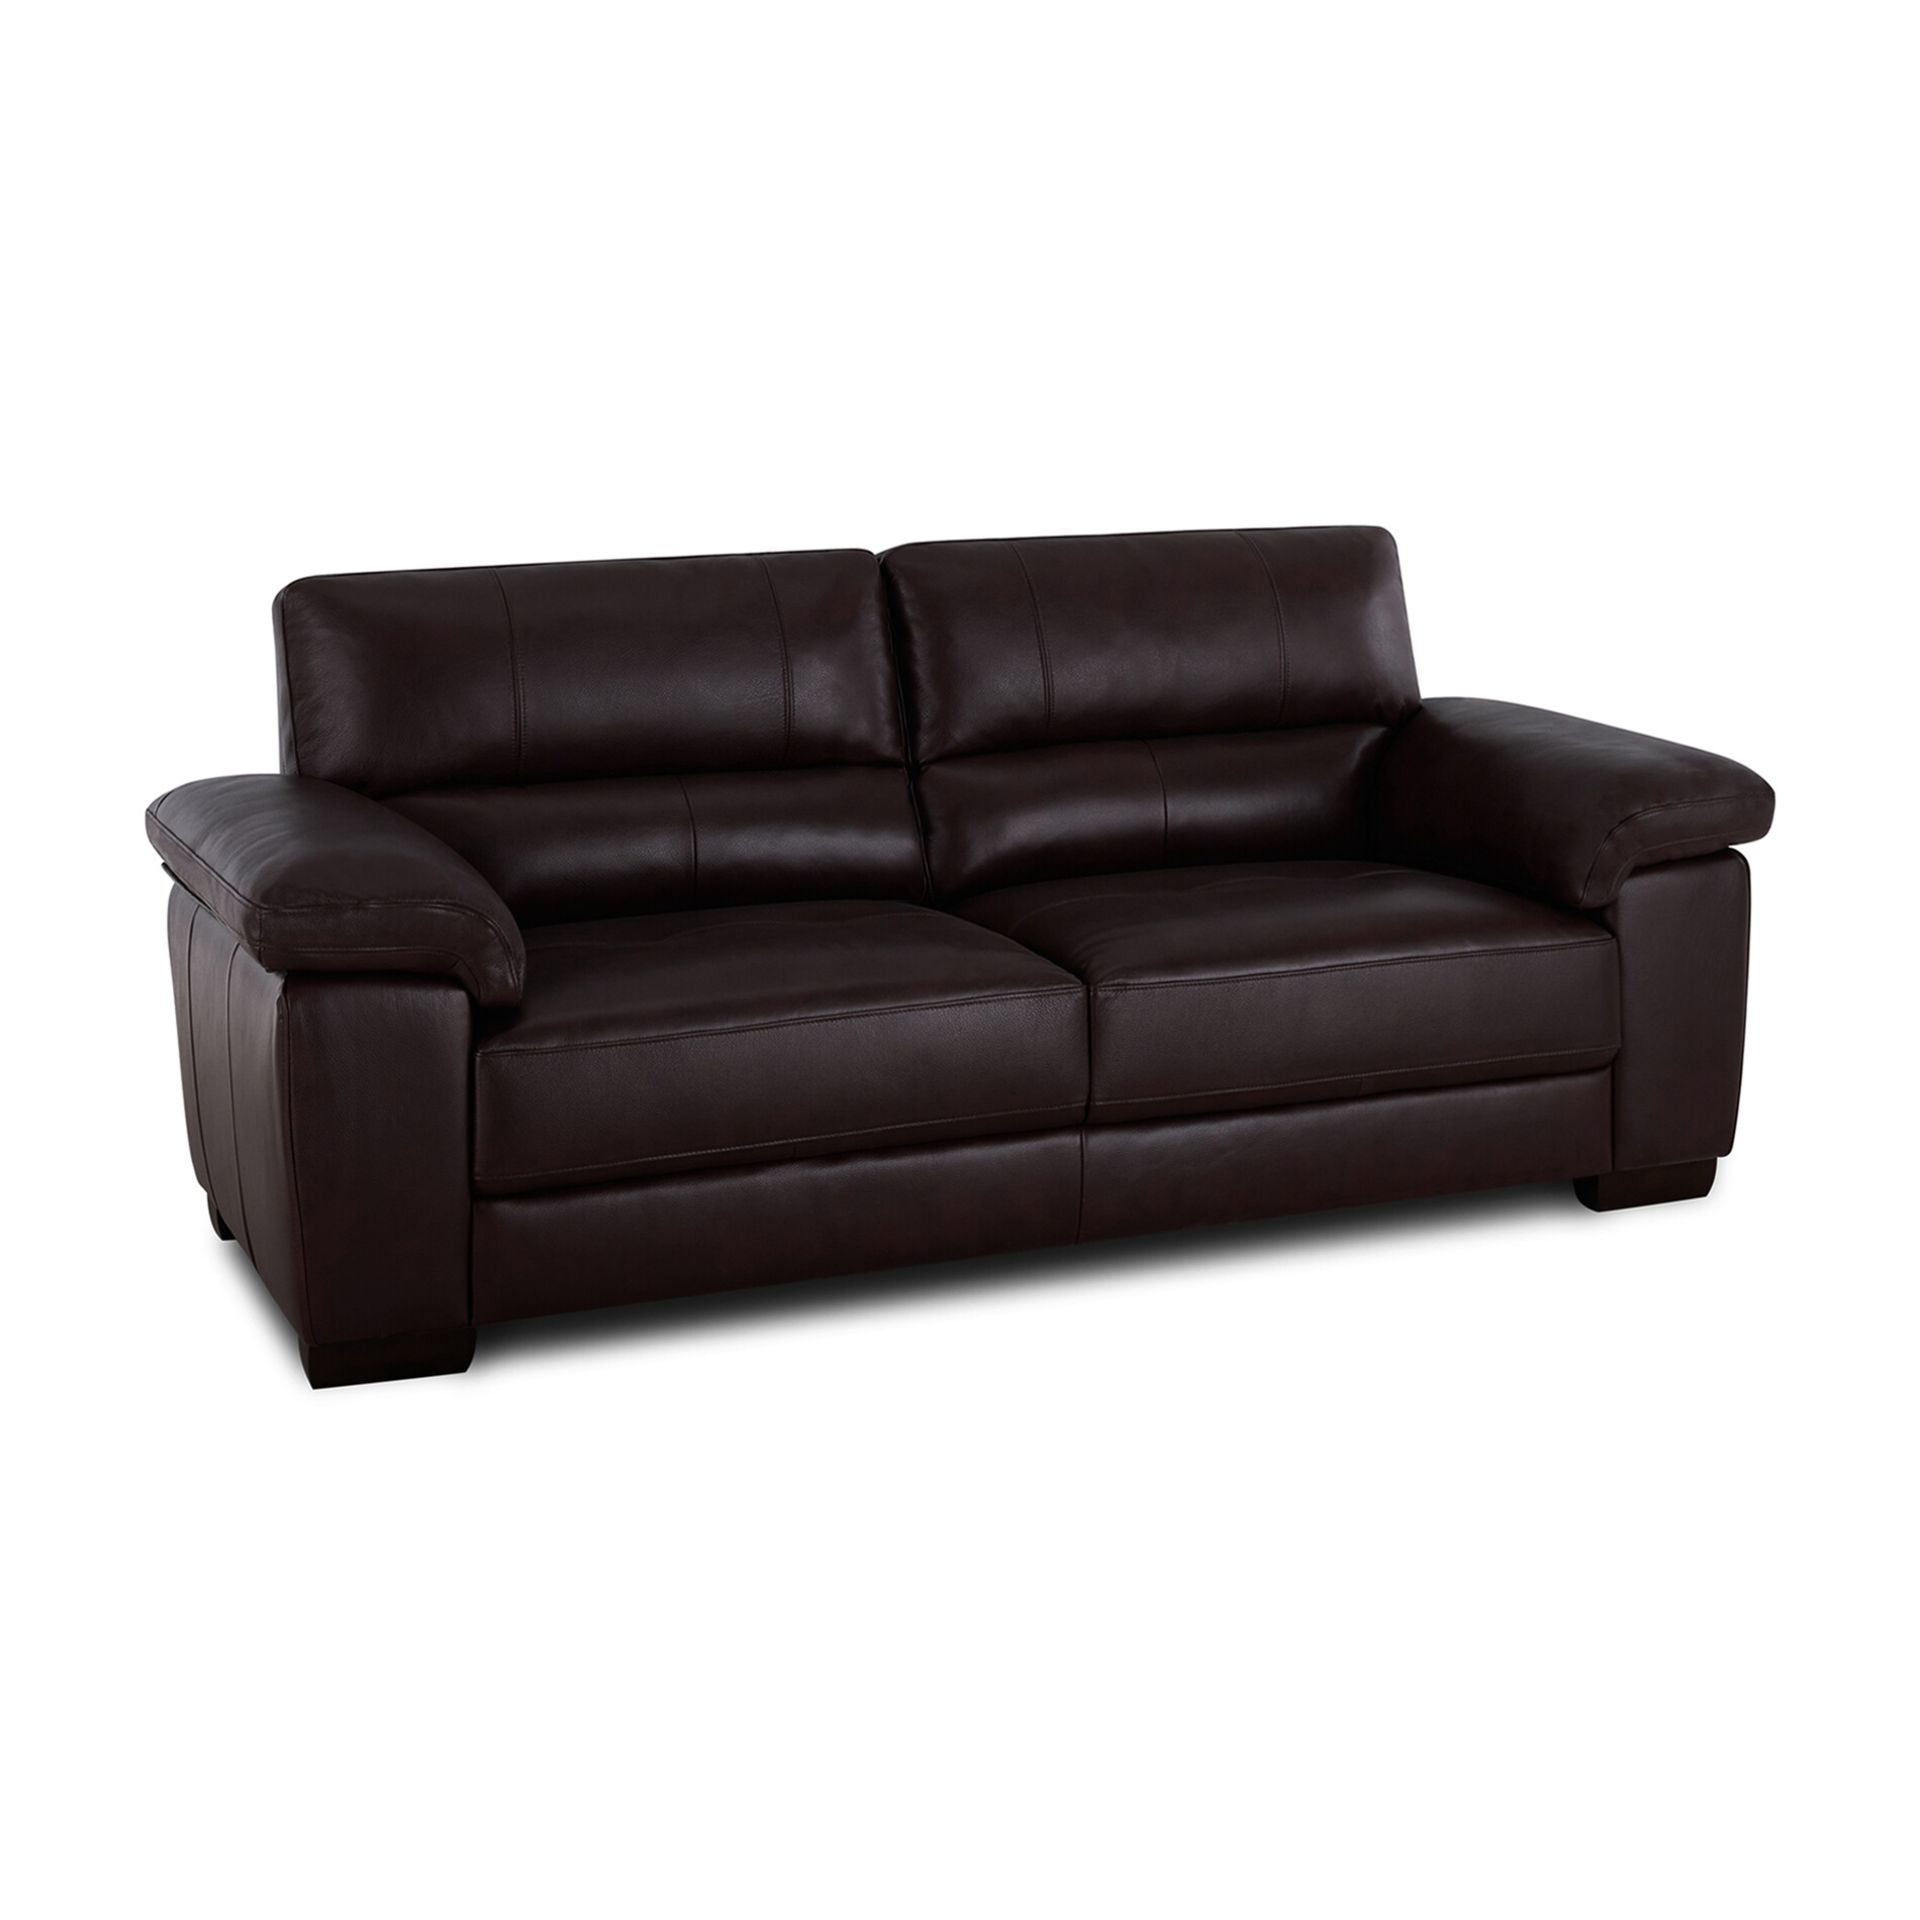 Oak Furnitureland Turin 3 Seater Sofa in Two Tone Brown Leather RRP 999.99About the Product(s)Our